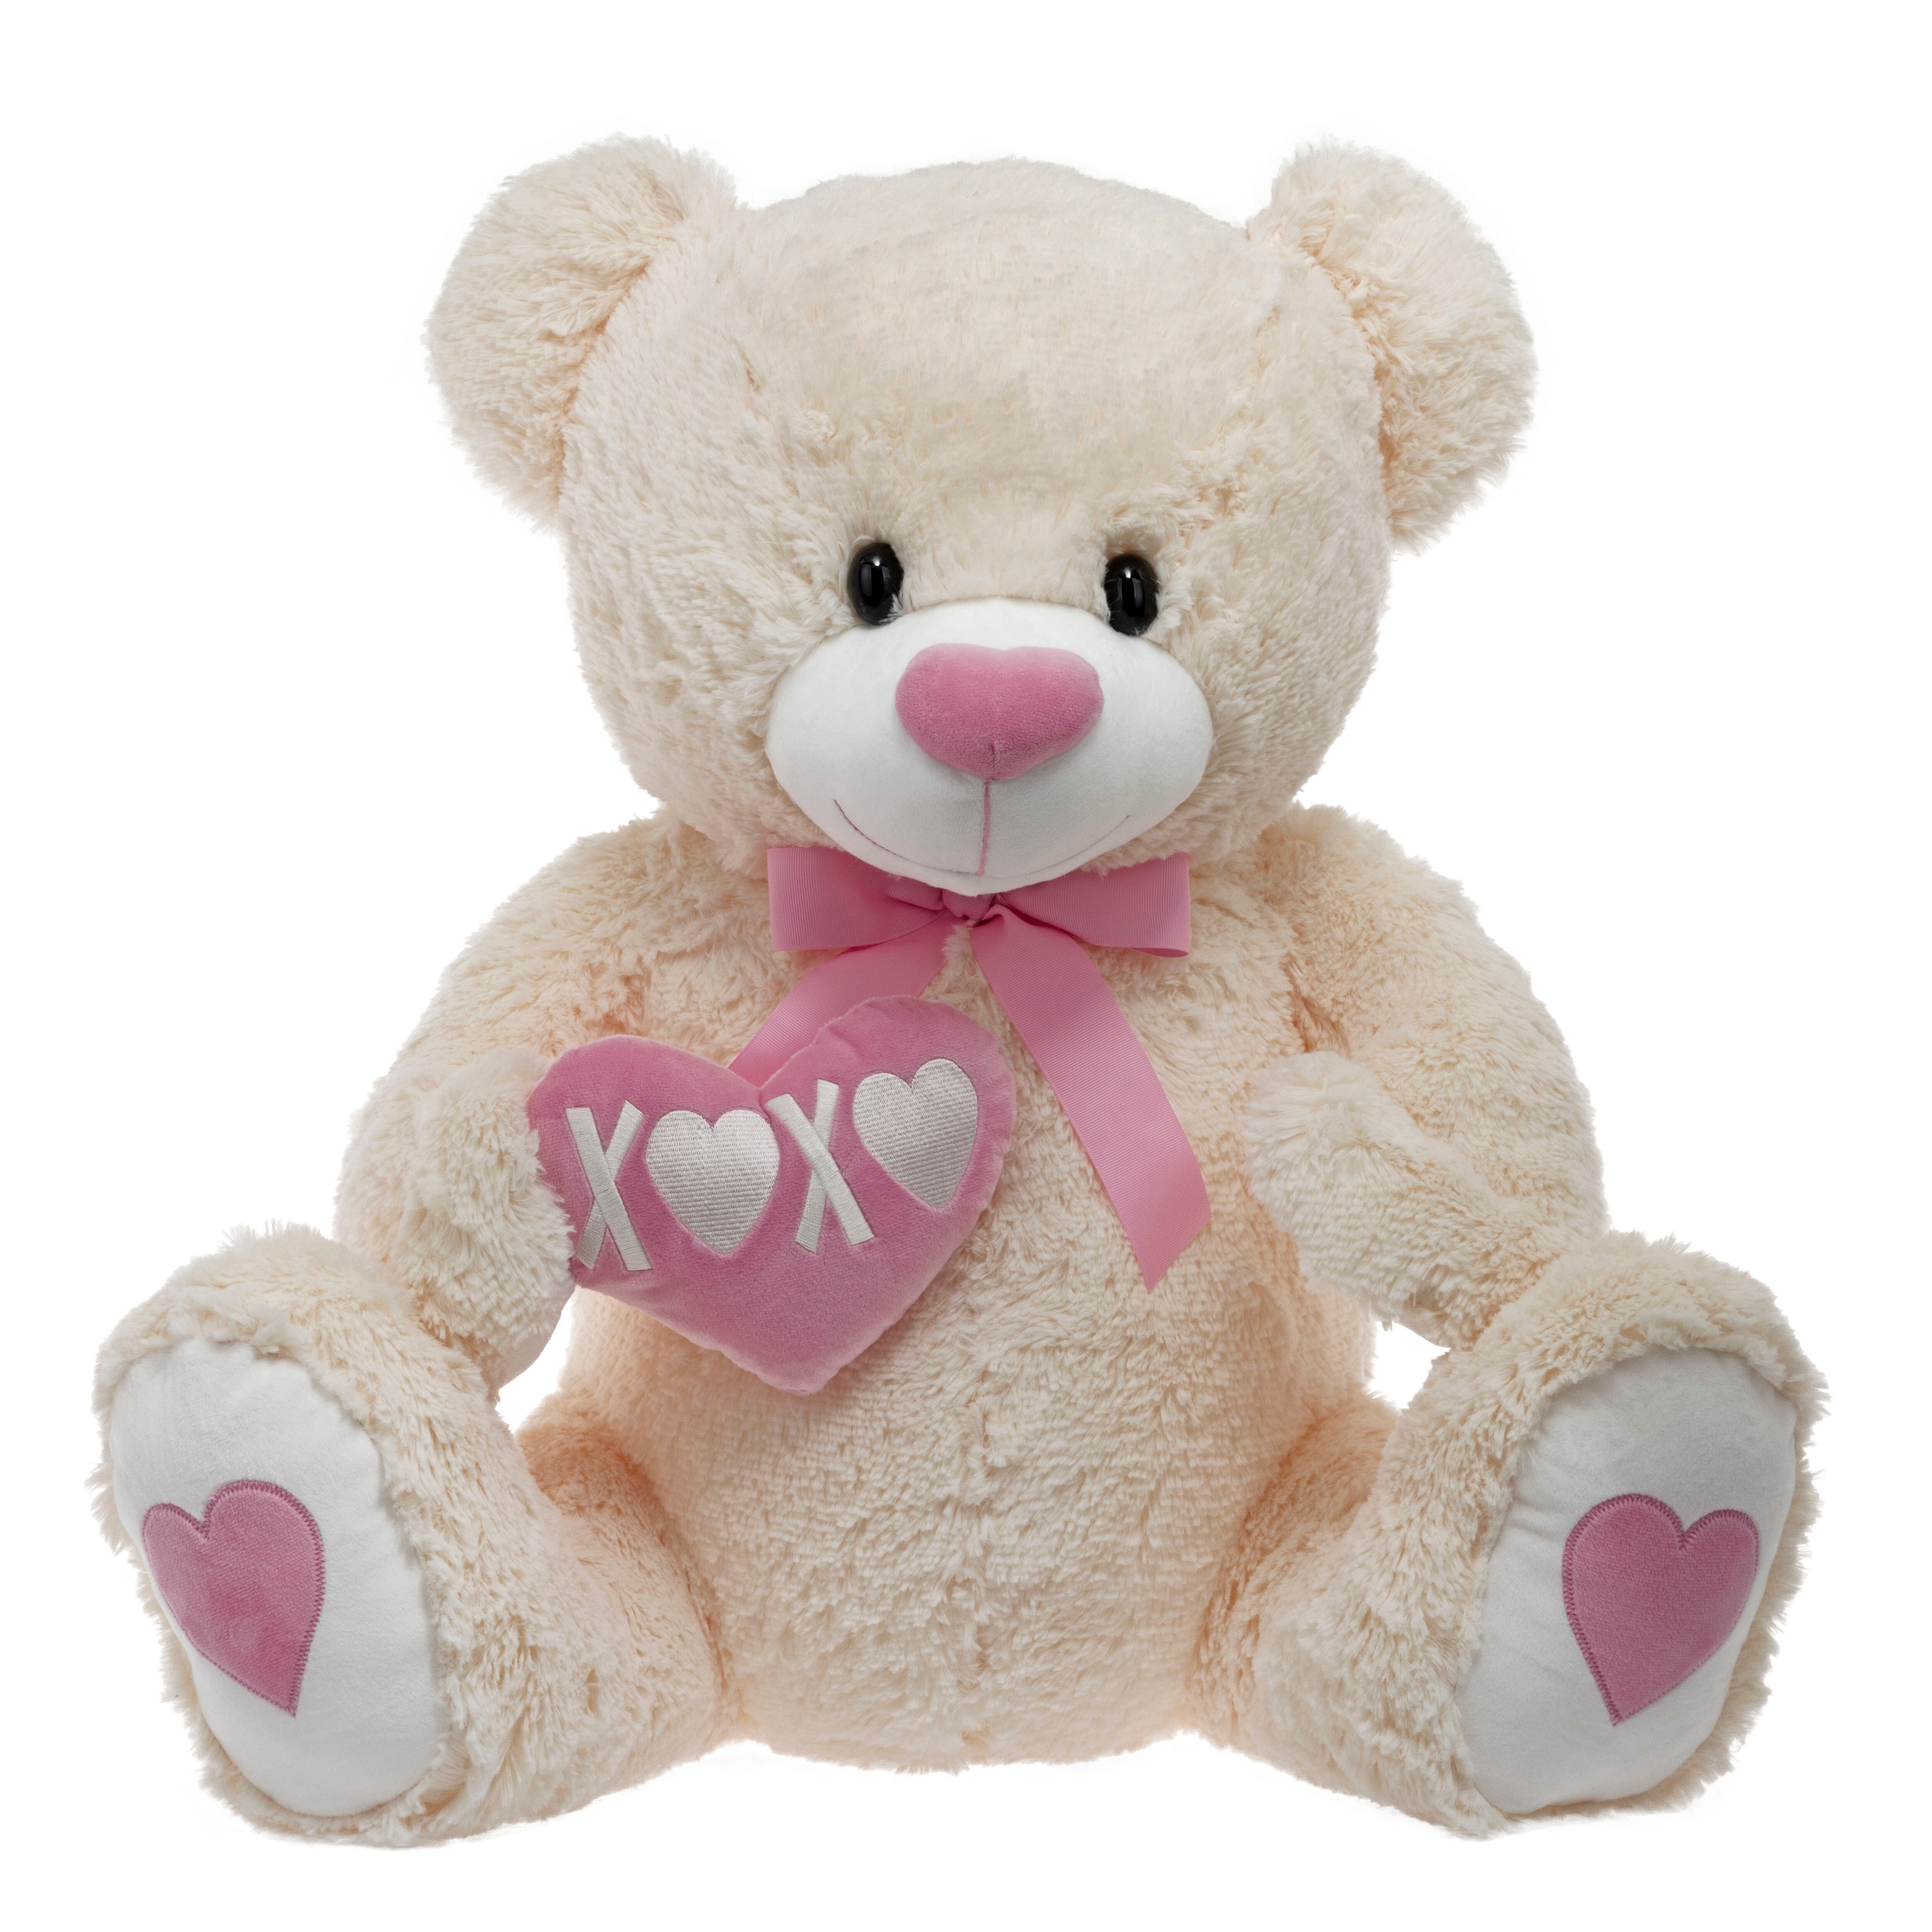 Red & Pink Teddy Plush, White, 32 In , CVS